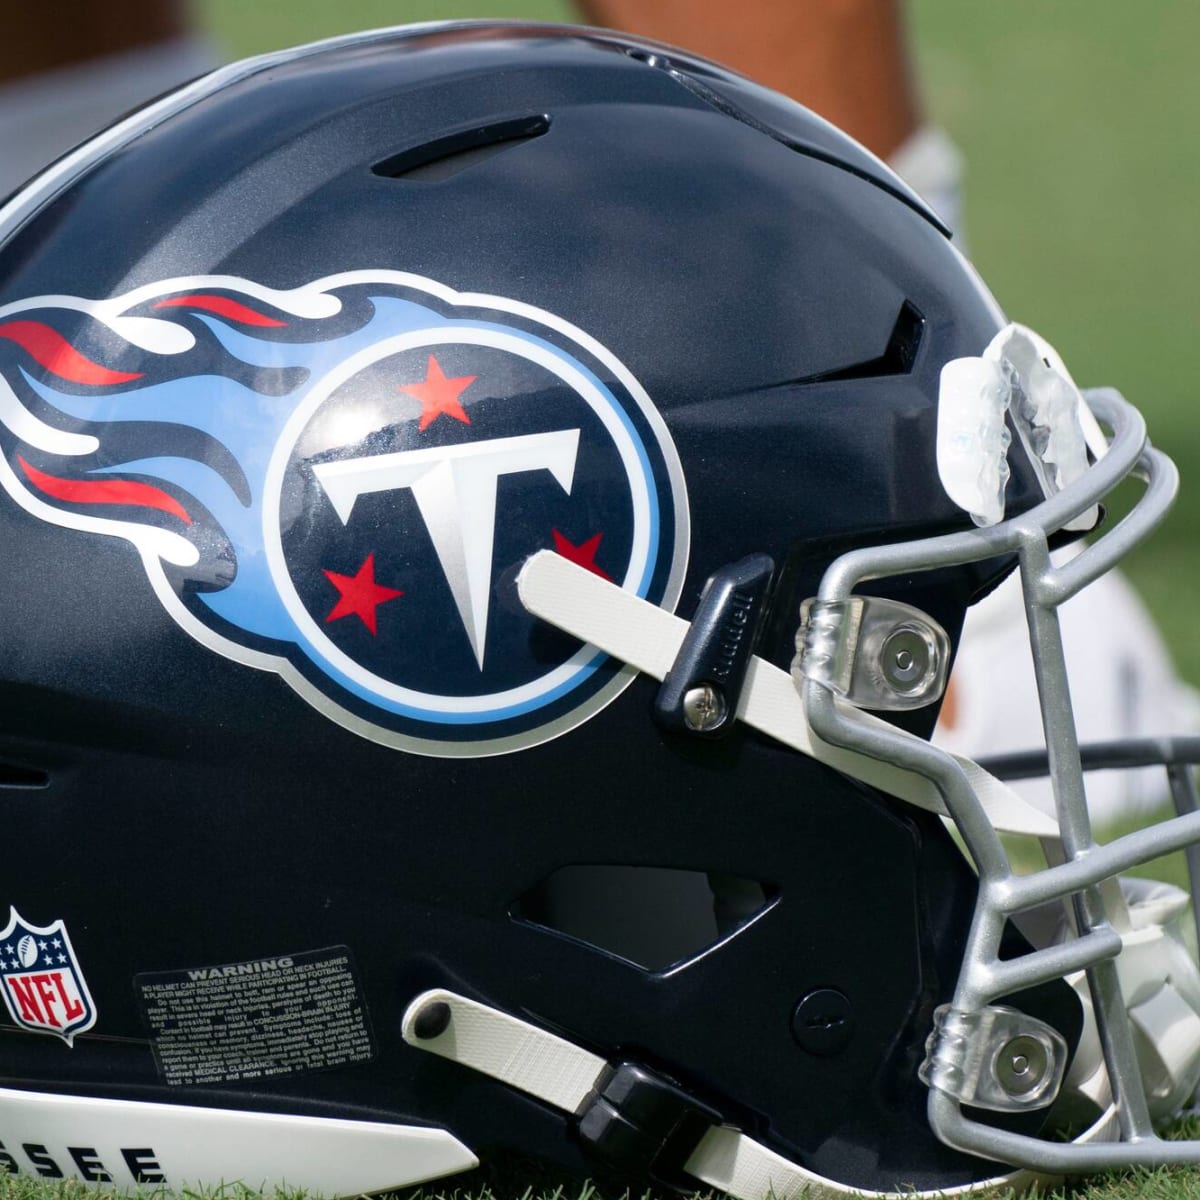 Report: Tennessee Titans, Mayor Cooper reach deal for new NFL